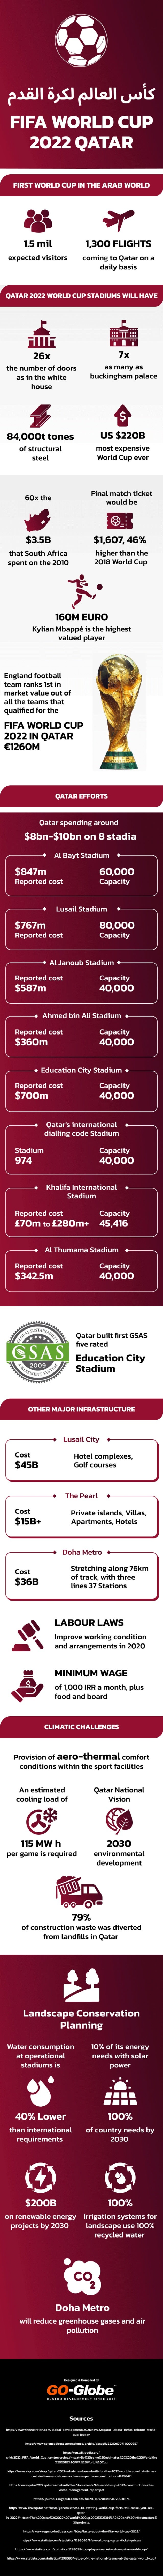 FIFA World Cup 2022 Qatar Interesting Facts [Infographic]